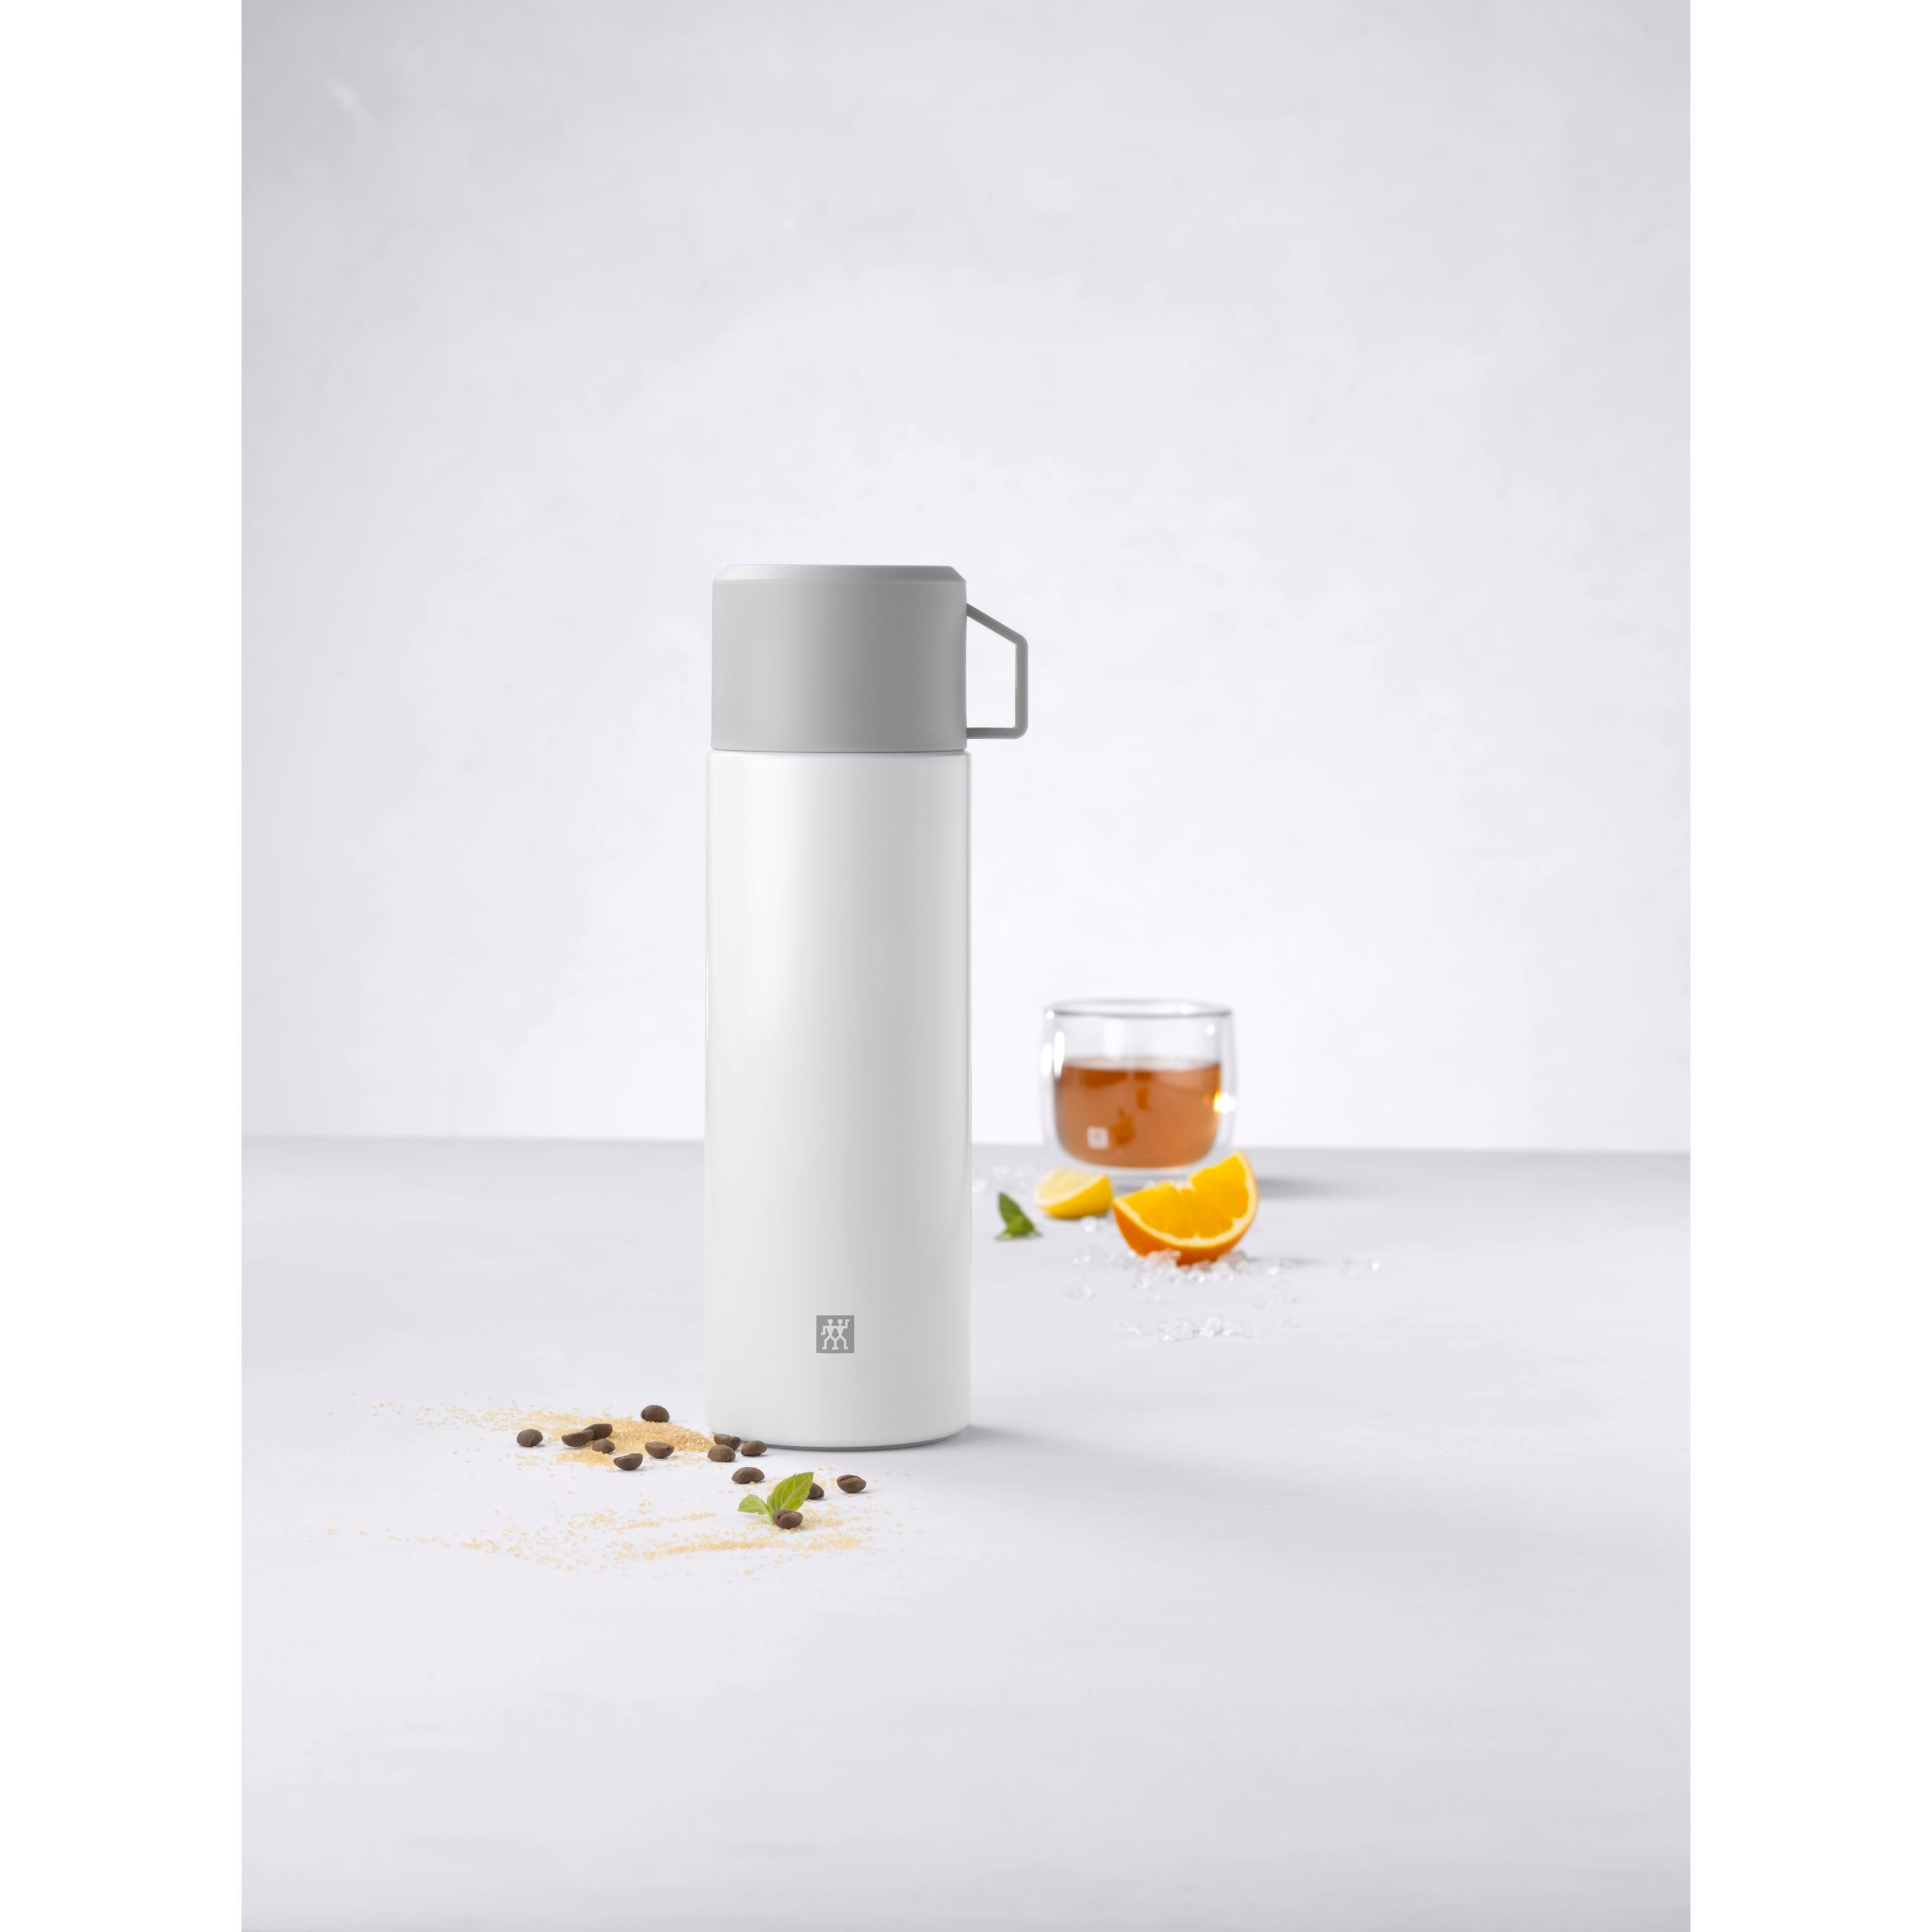 Zwilling Thermo Thermos flAsh 1 L, Silver-white